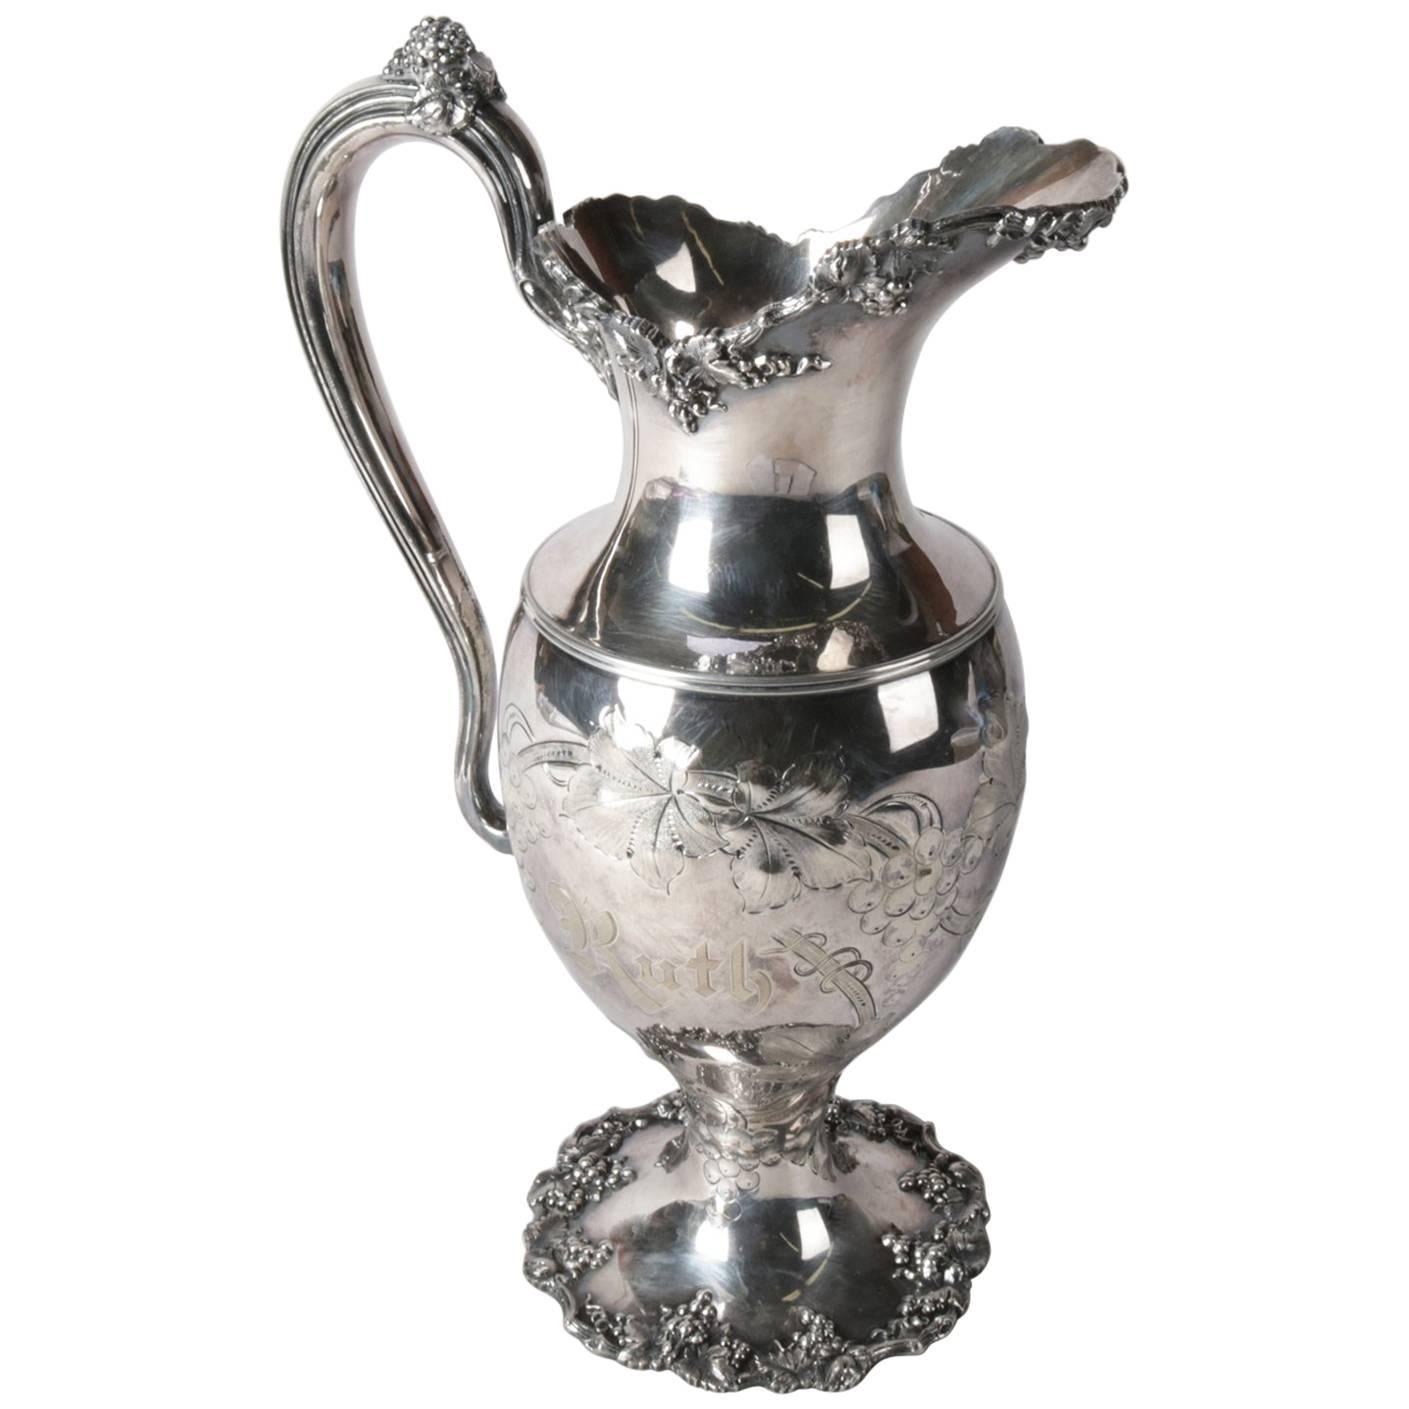 Ornate Victorian Engraved Silver Plate Ewer by Barbour Silver Co., circa 1880